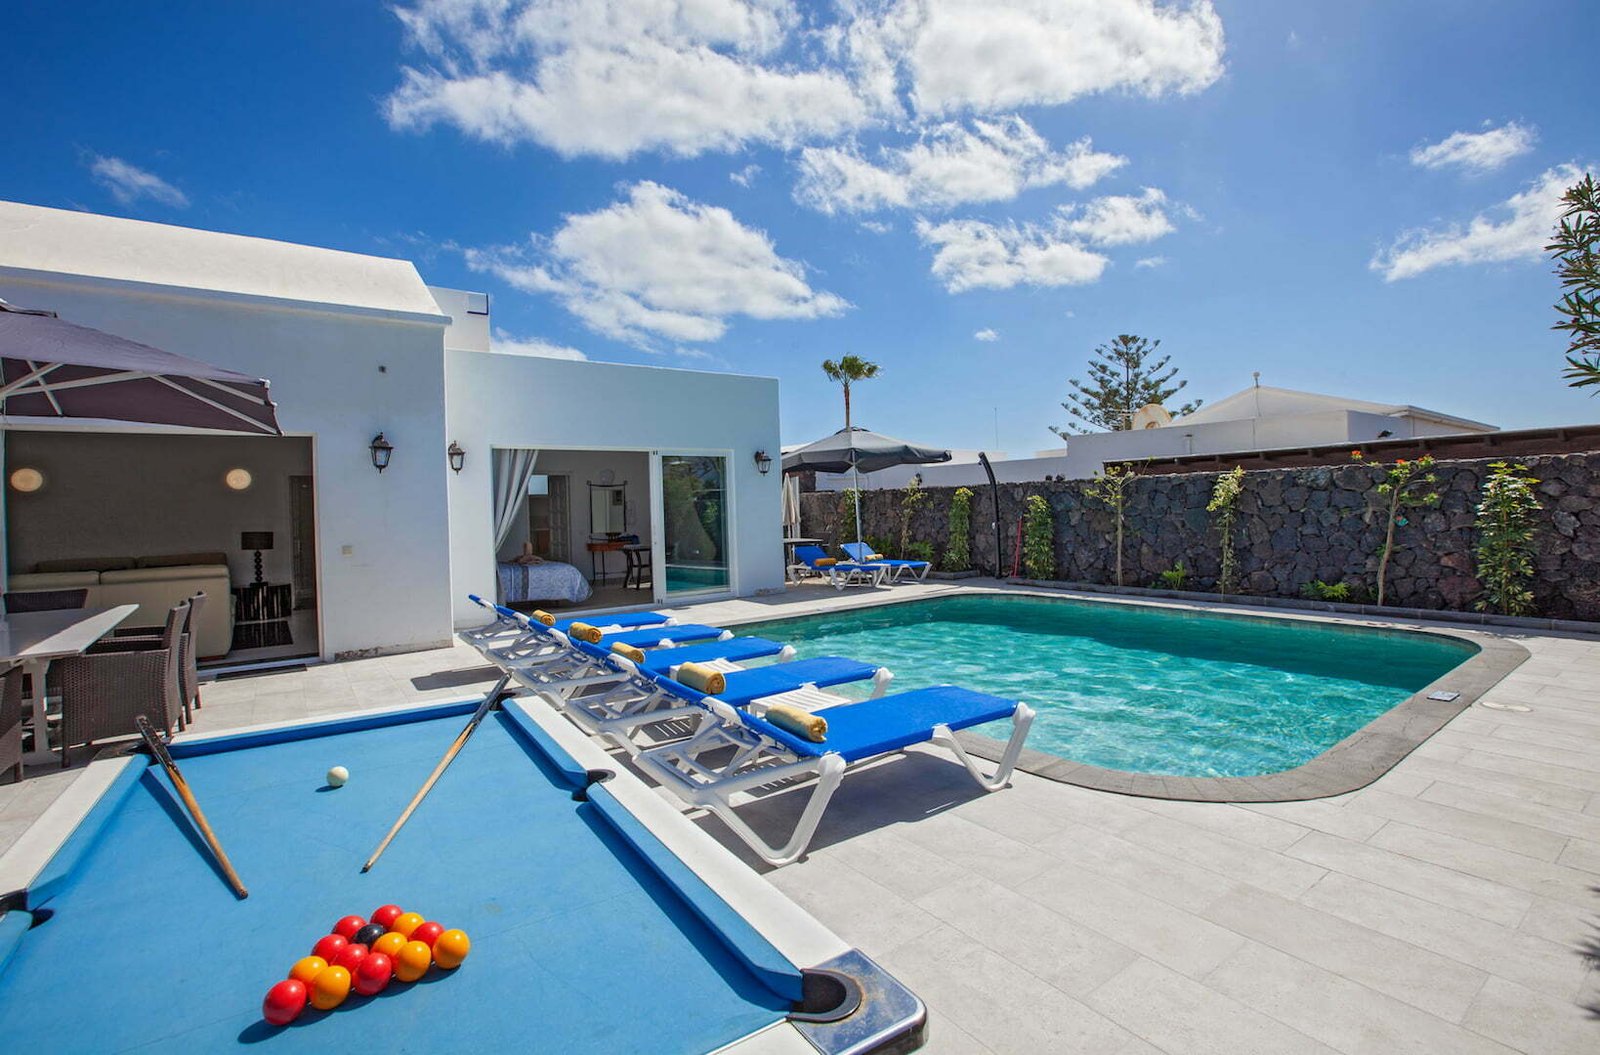 Casa Cristal - Terrace Area With American Pool Table & Sun Loungers - Private Salt Water Pool